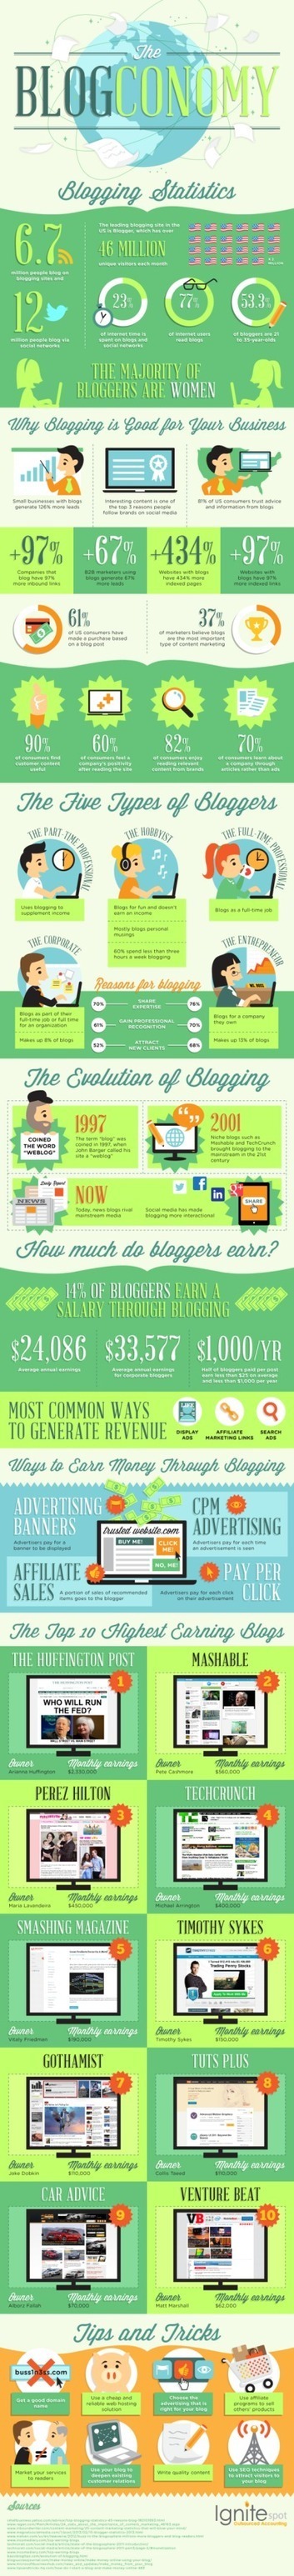 Why Every Business Needs a Blog [Infographic] | Web 2.0 for juandoming | Scoop.it